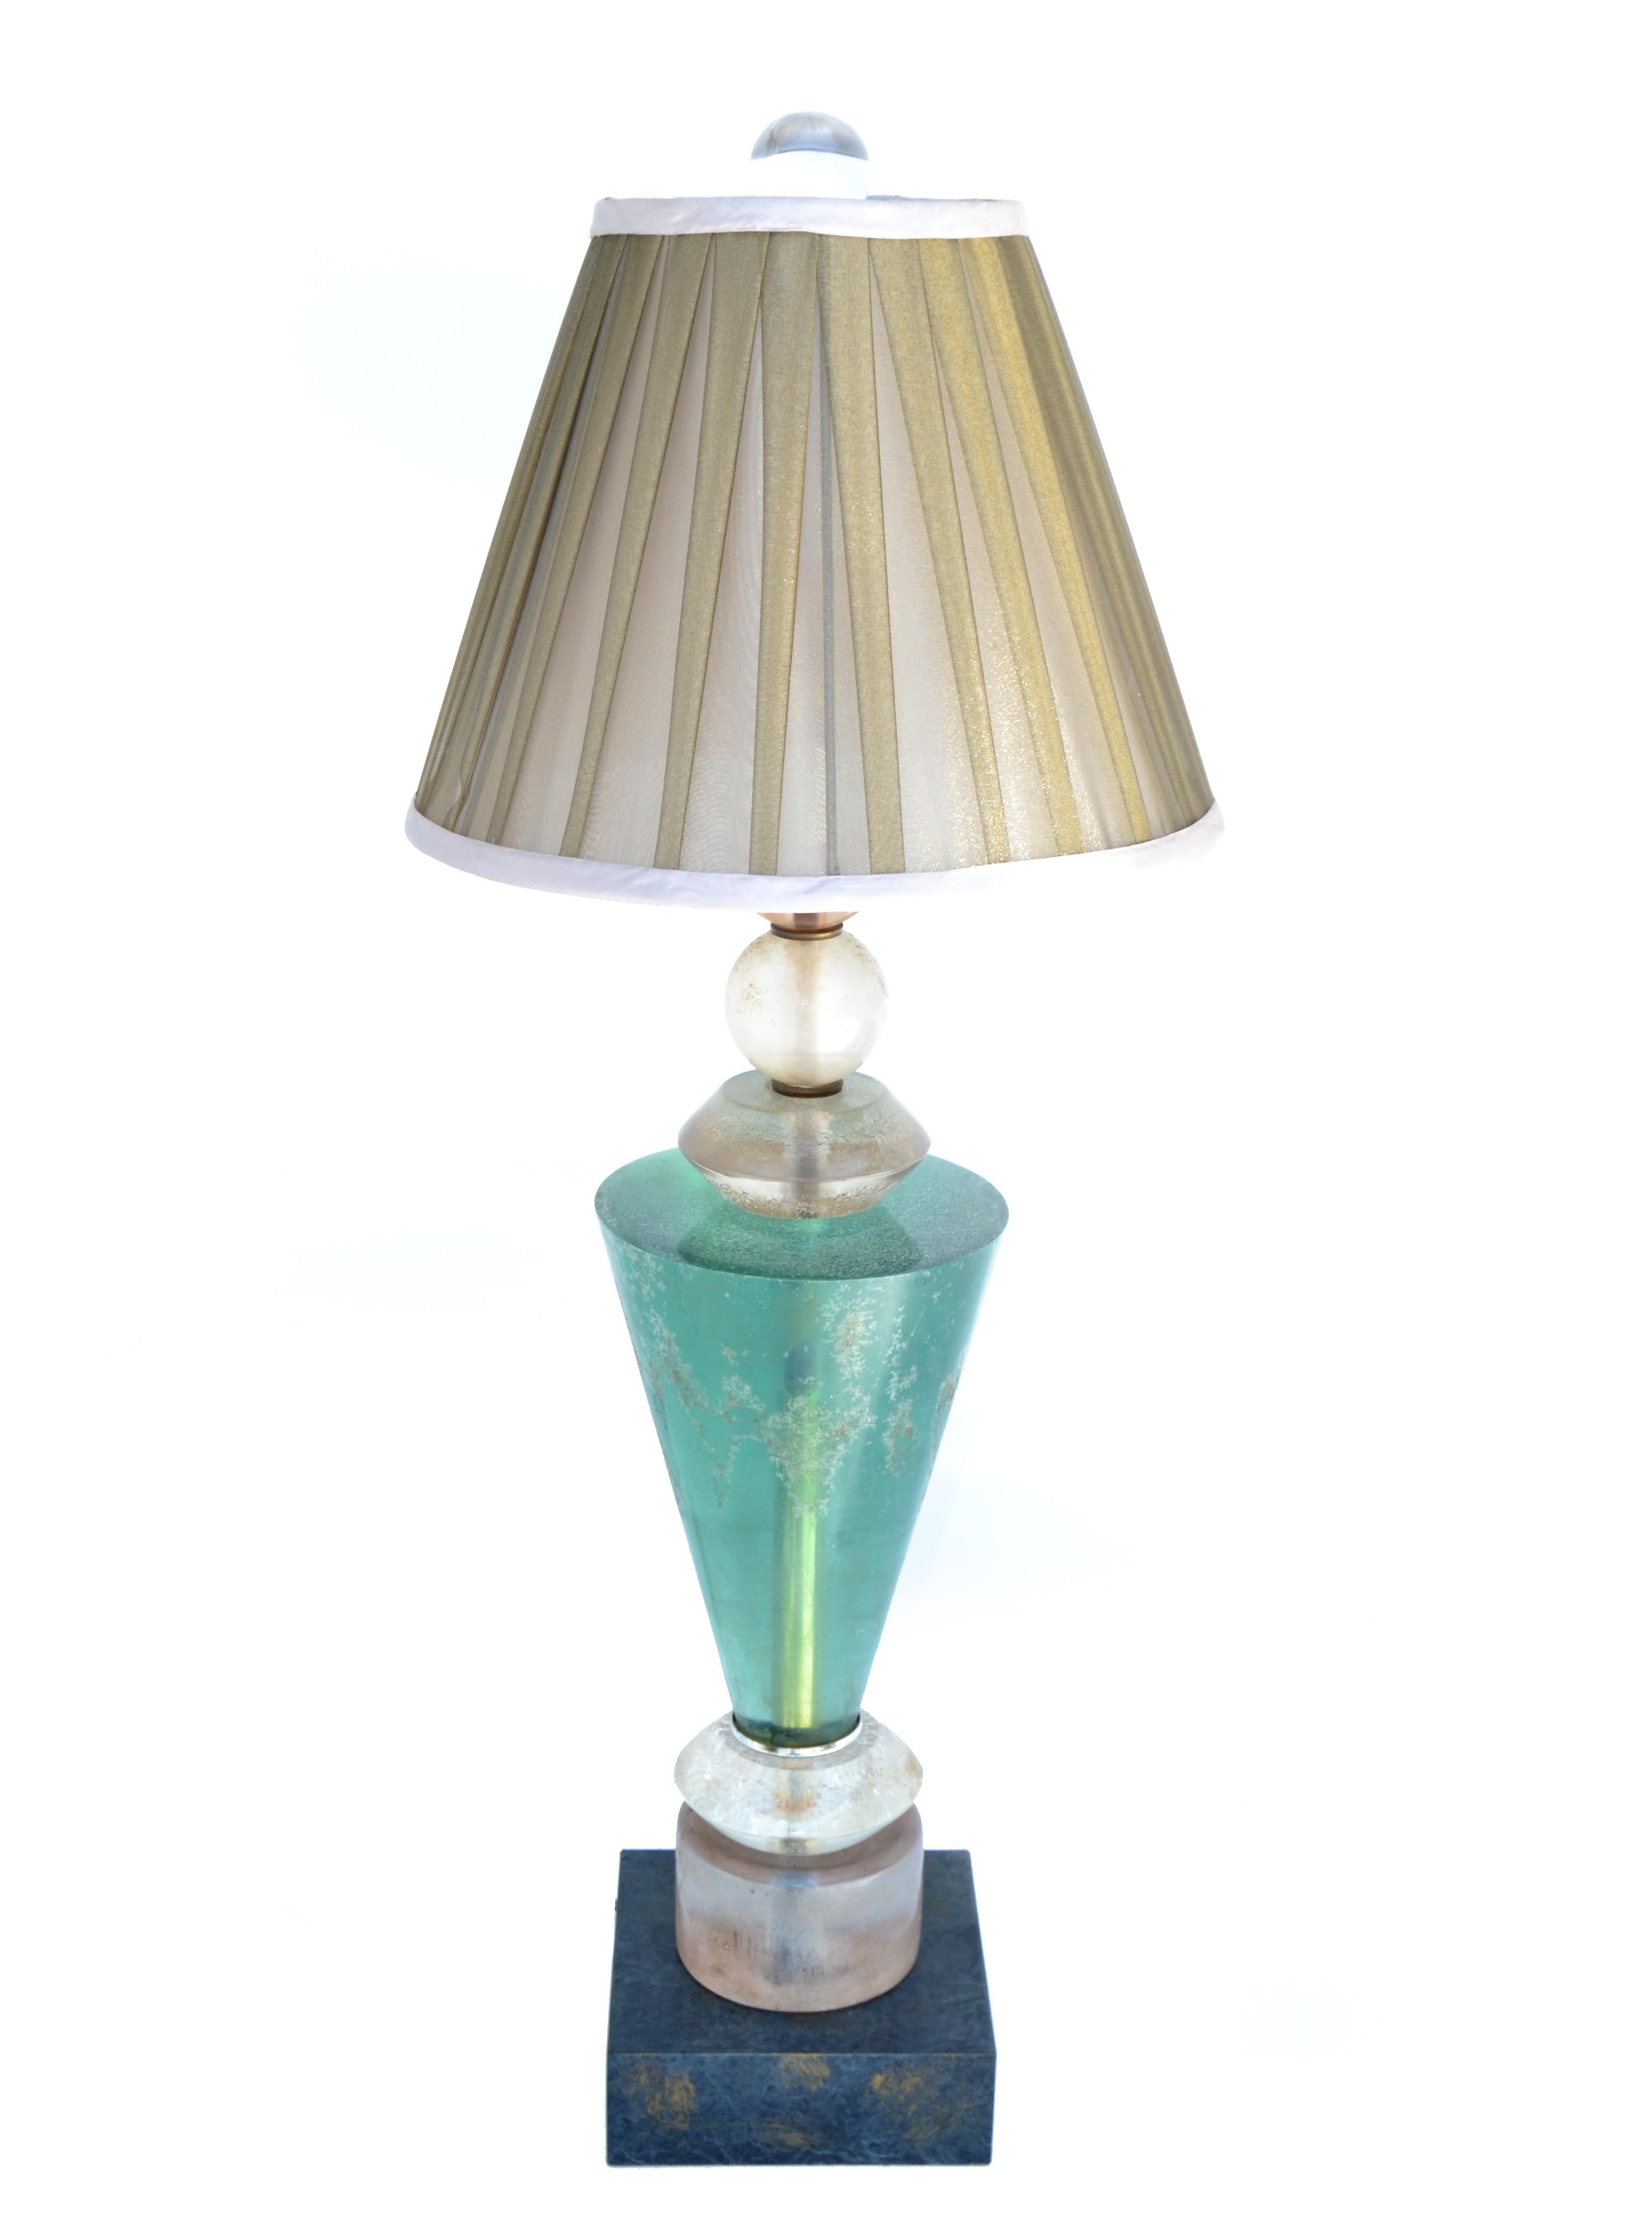 Van Teal Mid-Century Modern Green, Black & Gold Lucite Table Lamp Pleated Shade For Sale 7